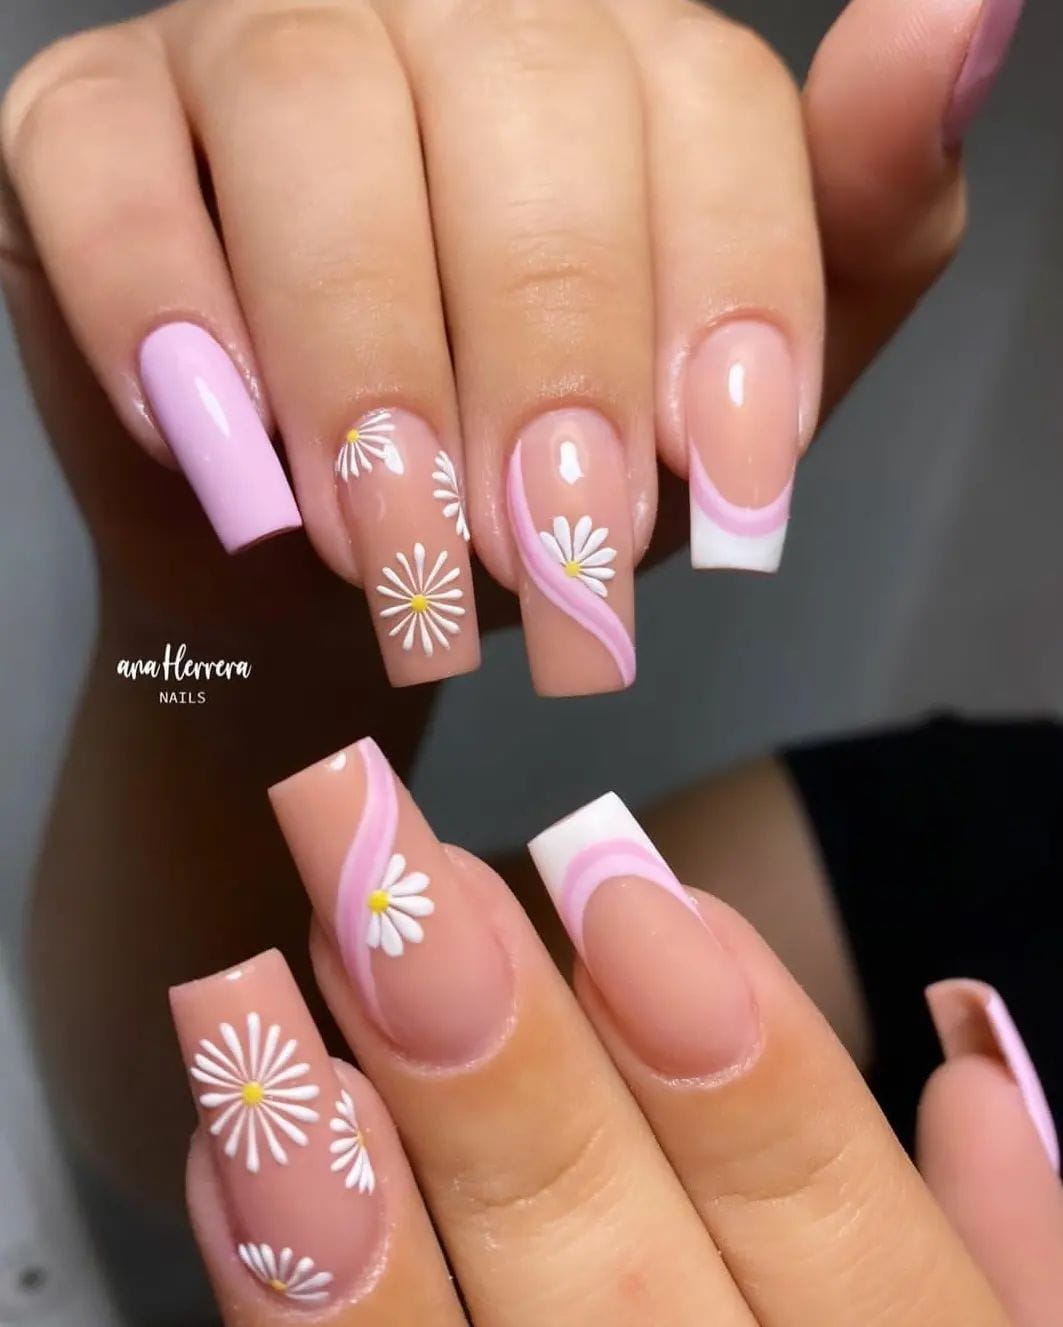 Best Winter Nail Designs And Art Ideas images 15